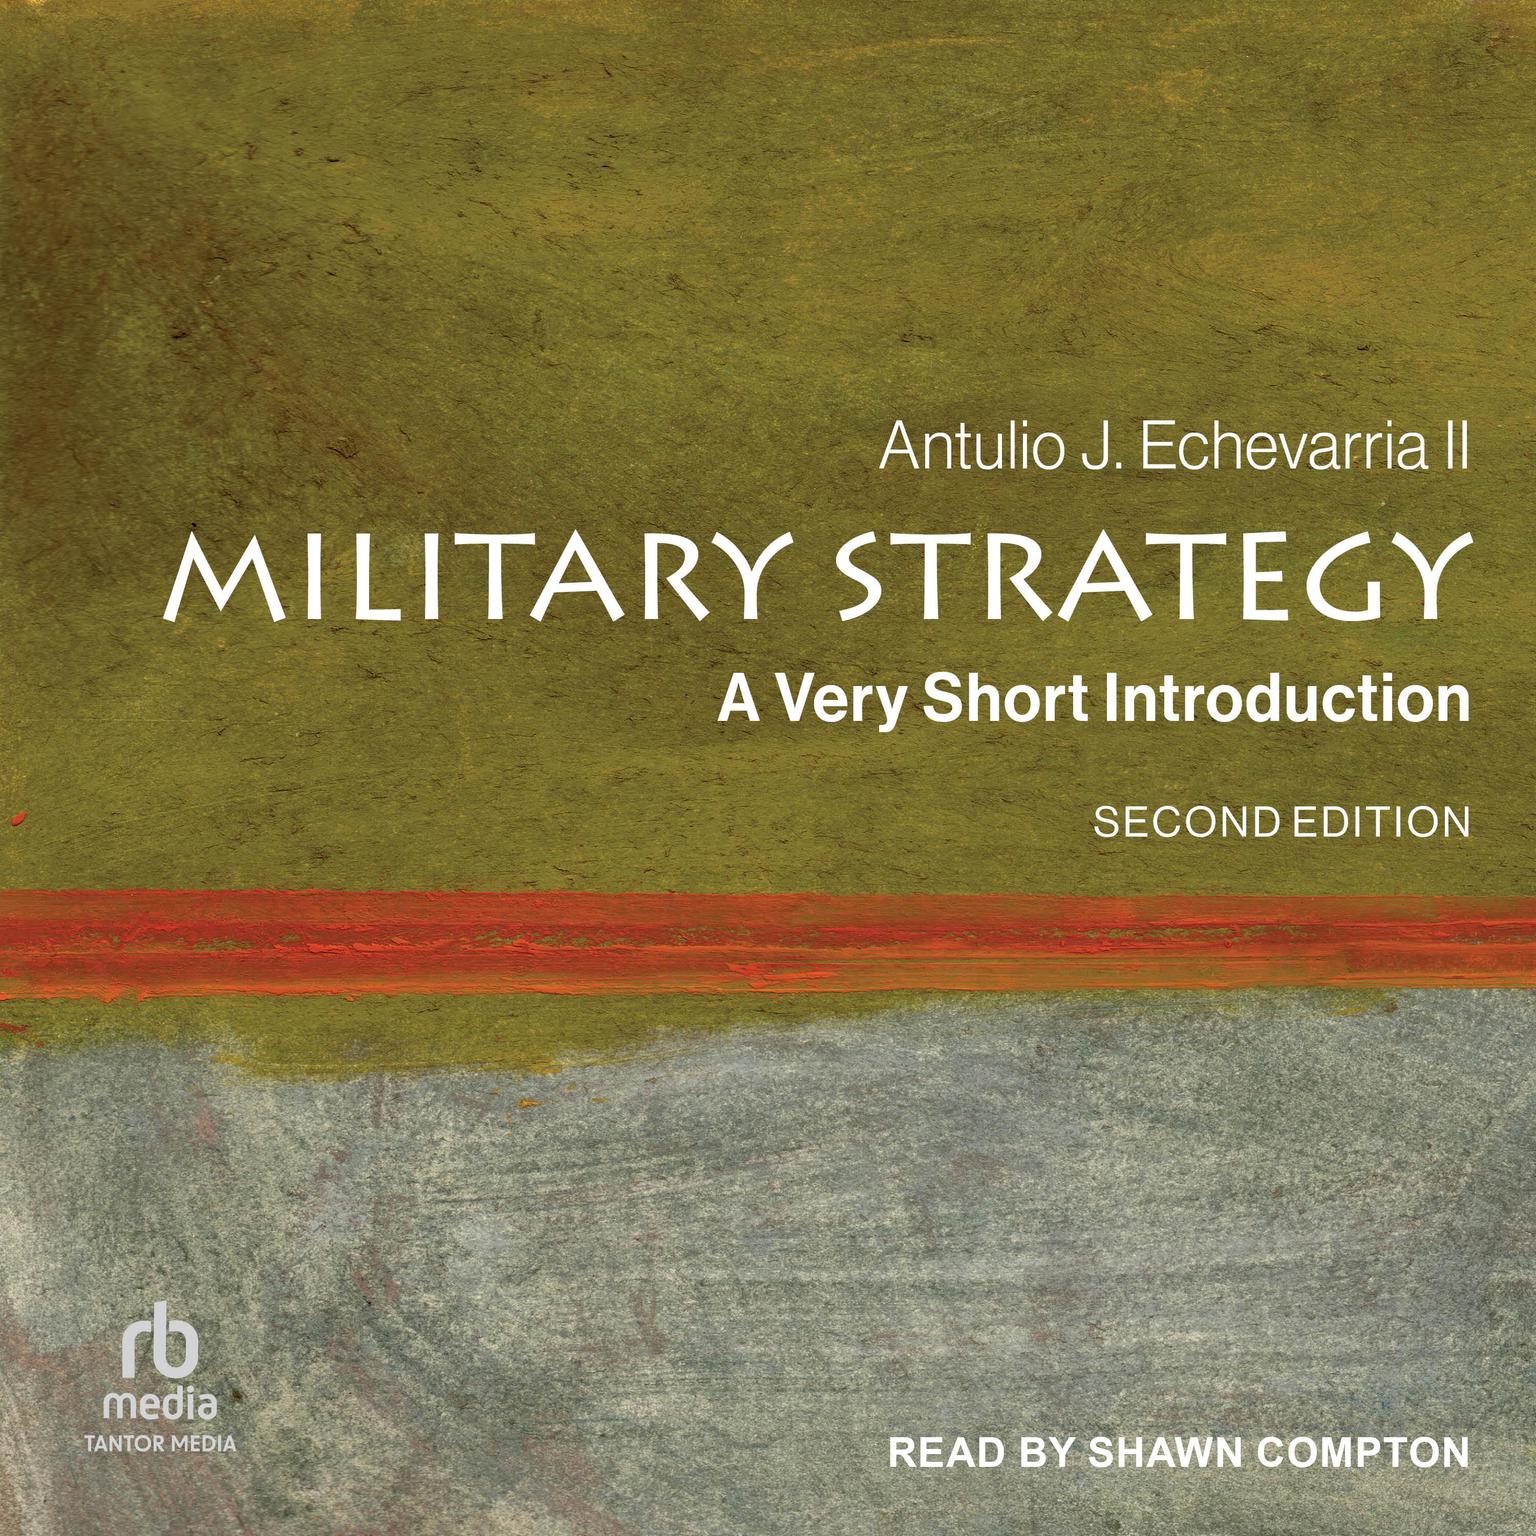 Military Strategy: A Very Short Introduction, 2nd Edition Audiobook, by Antulio J. Echevarria